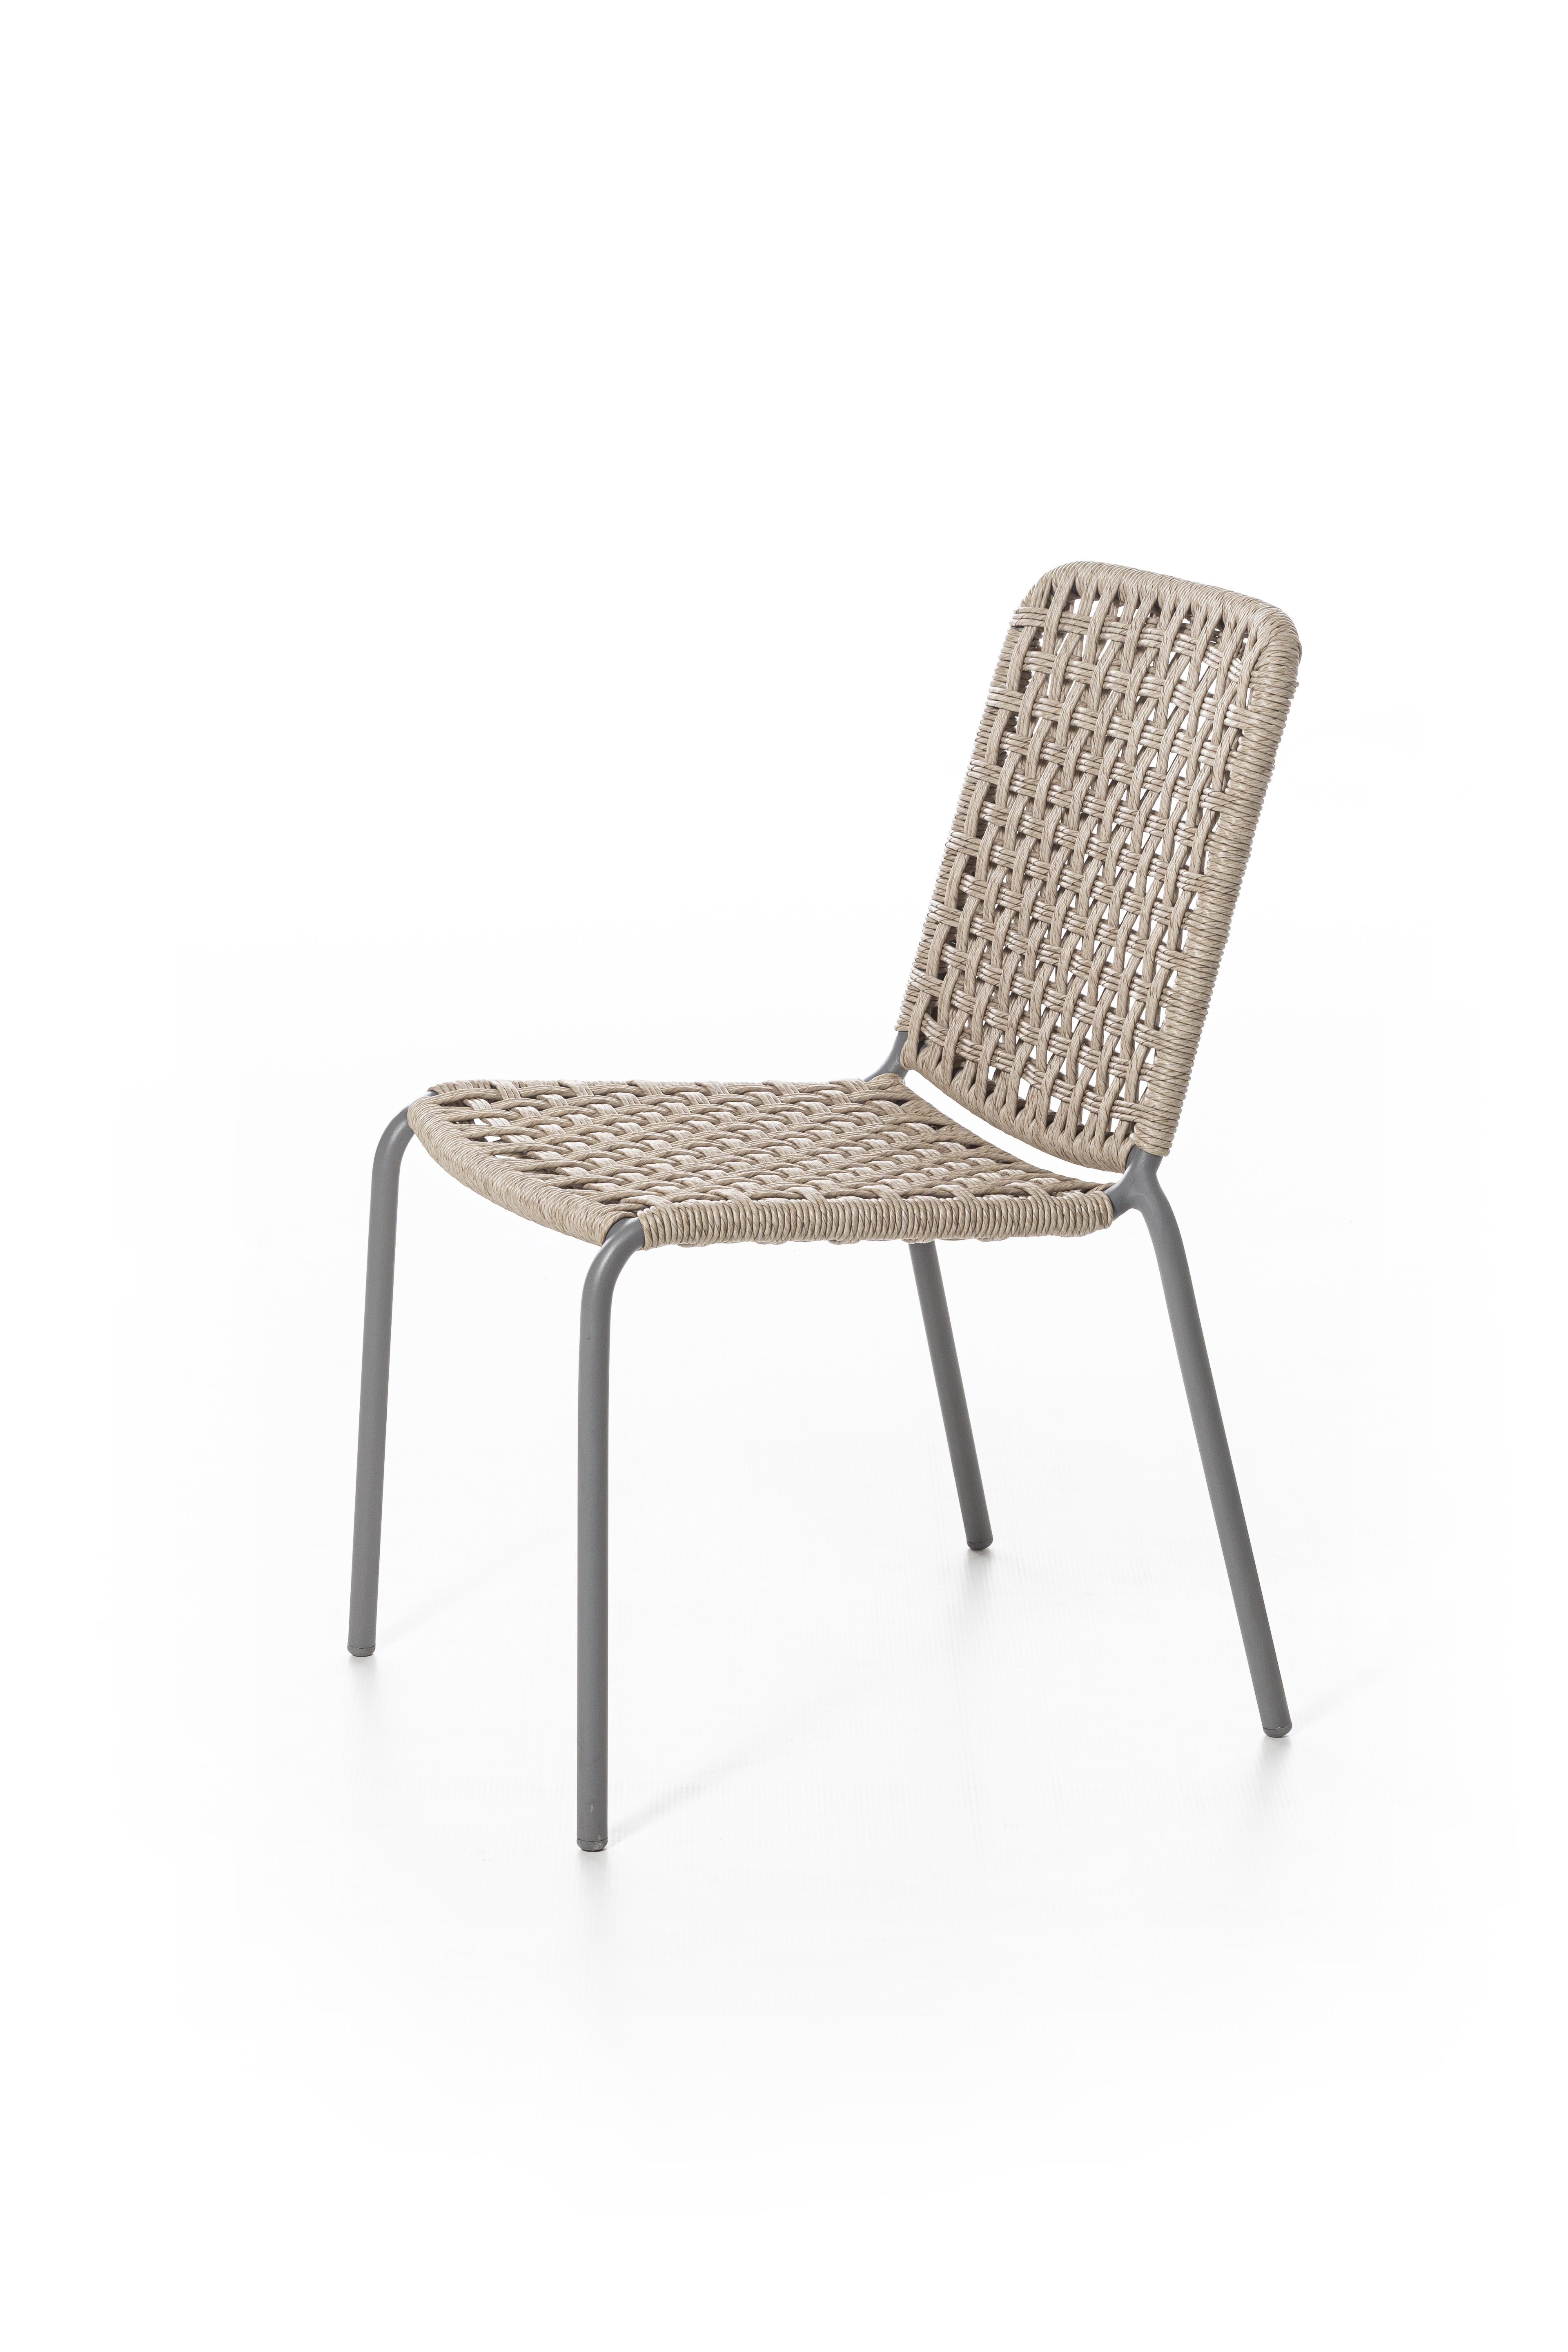 Simple and refined, the Straw 23/24 chair family, with and without armrests, is characterised by the structure in tubular aluminium painted light grey. A slender and light product covered with a handwoven weave with a double torsion polyethylene